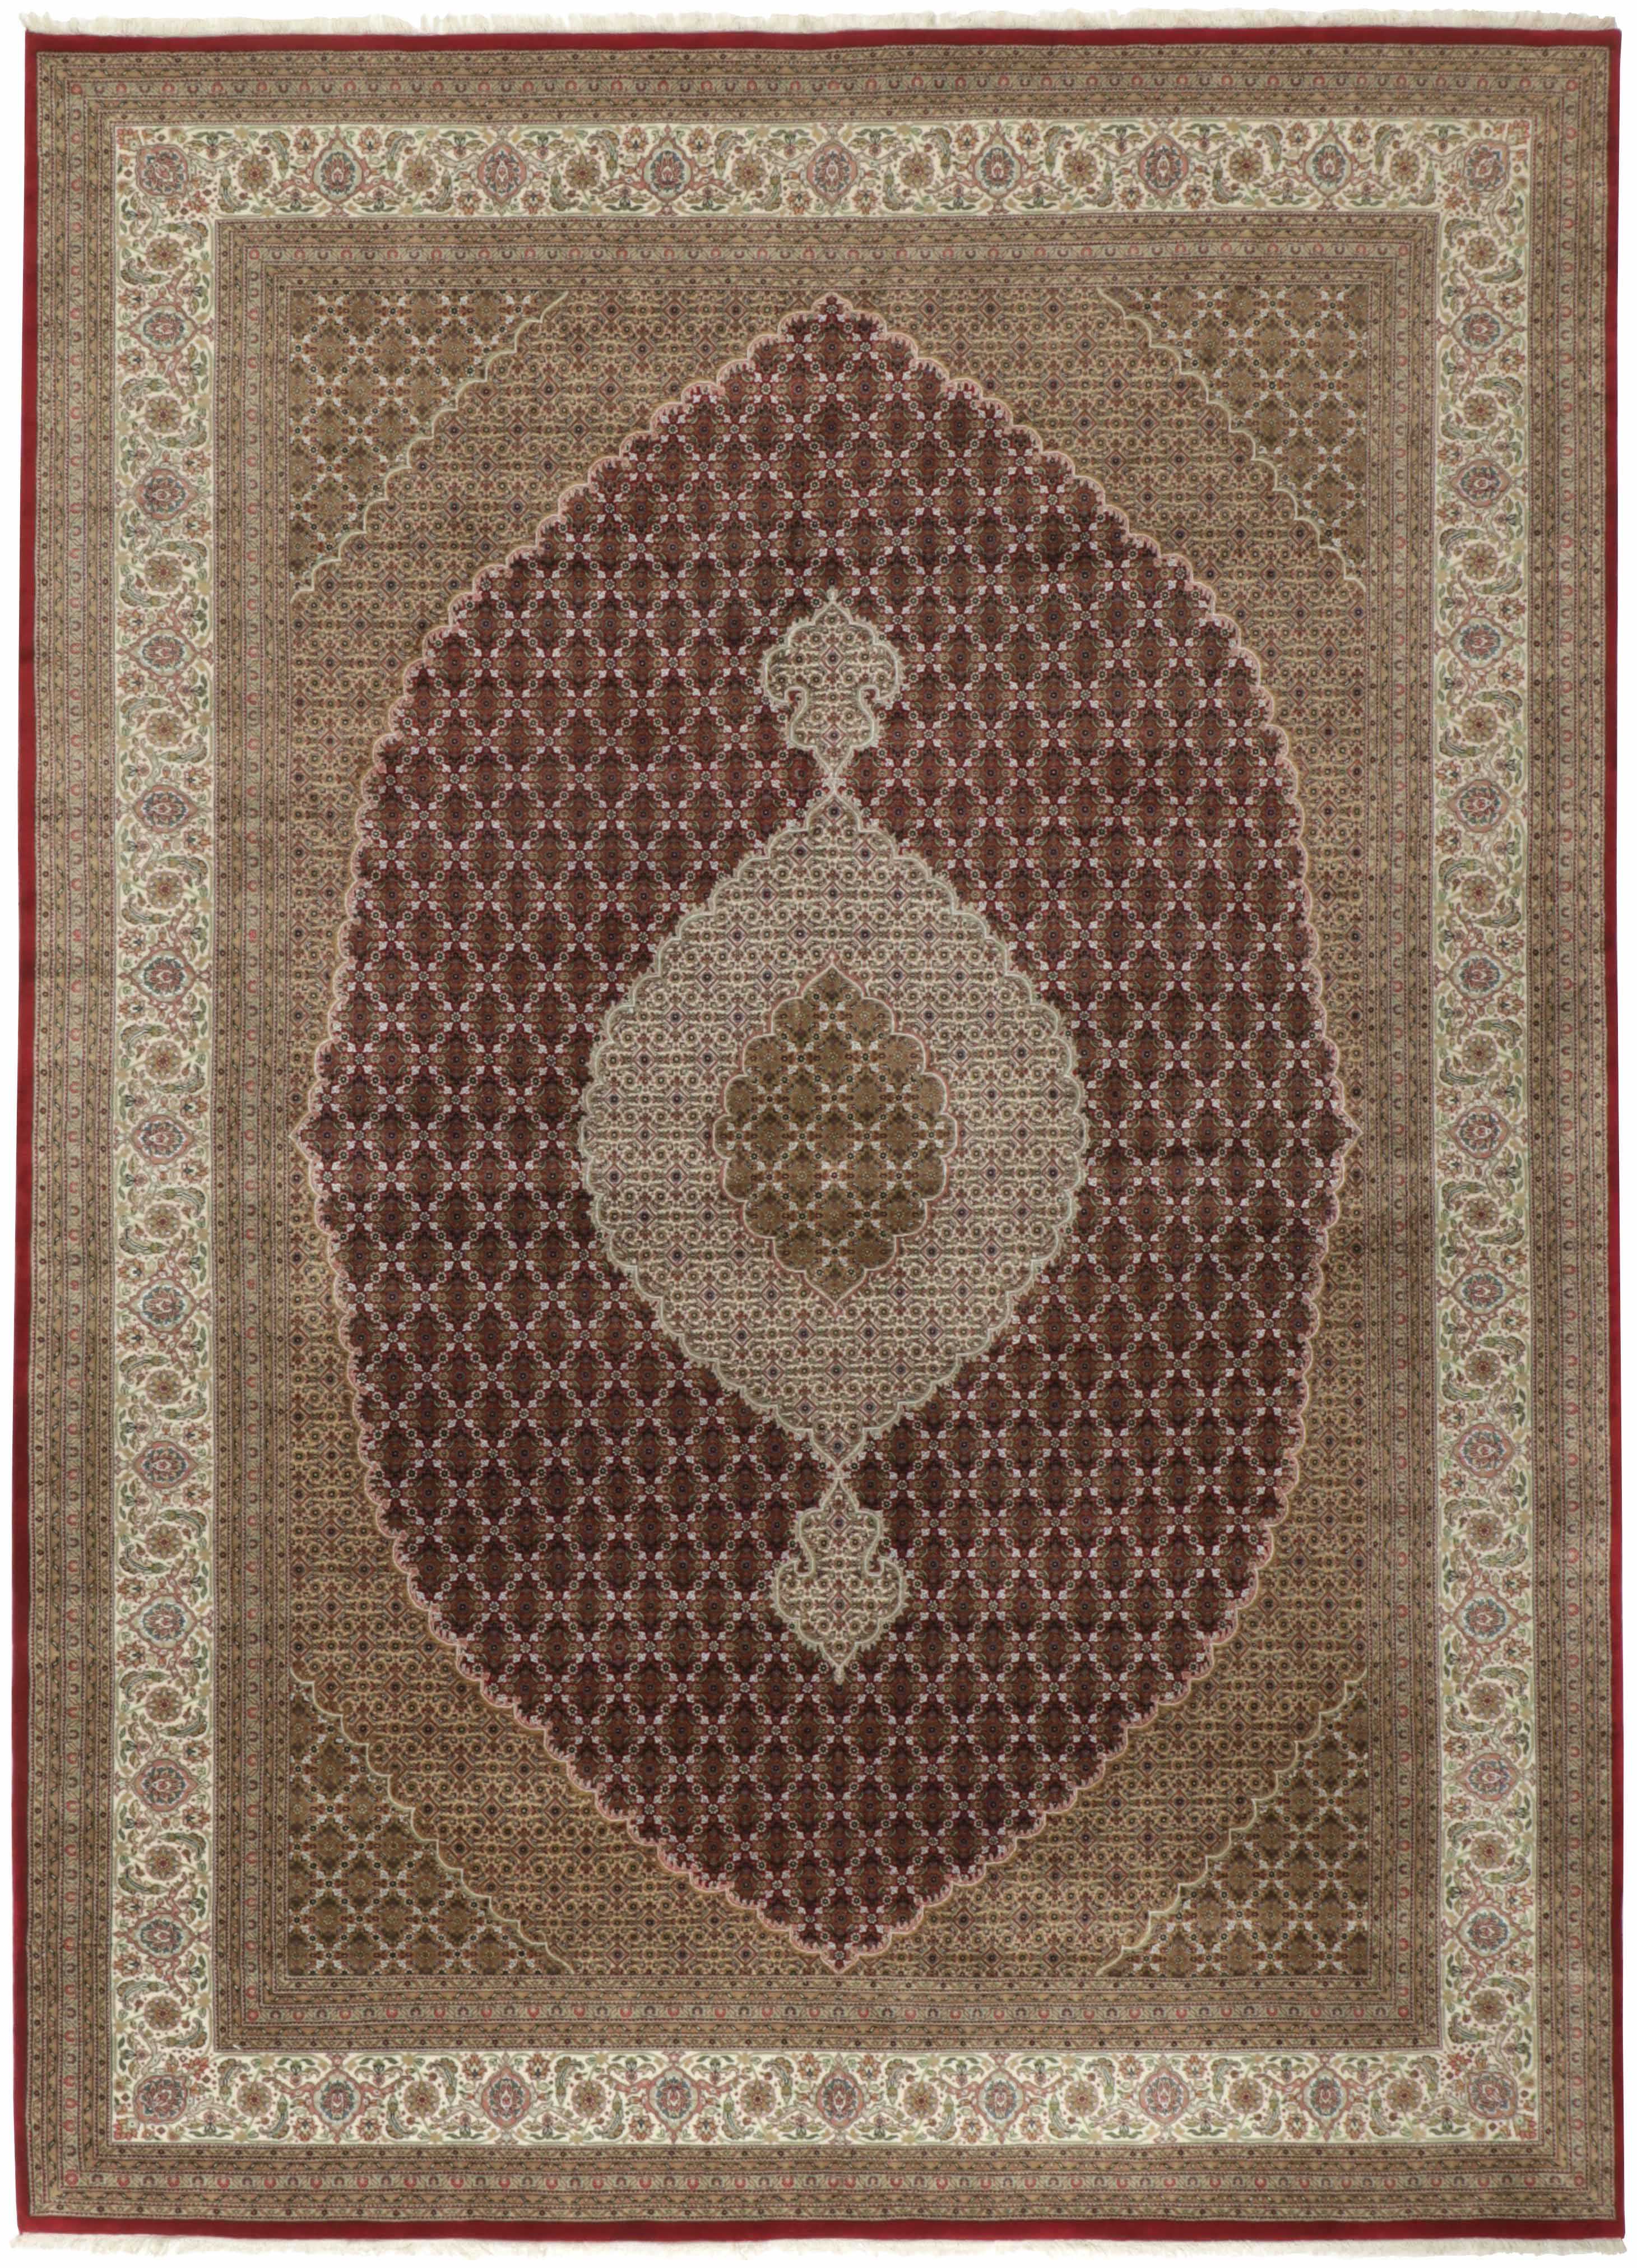 Large area rug with  abstract design in beige